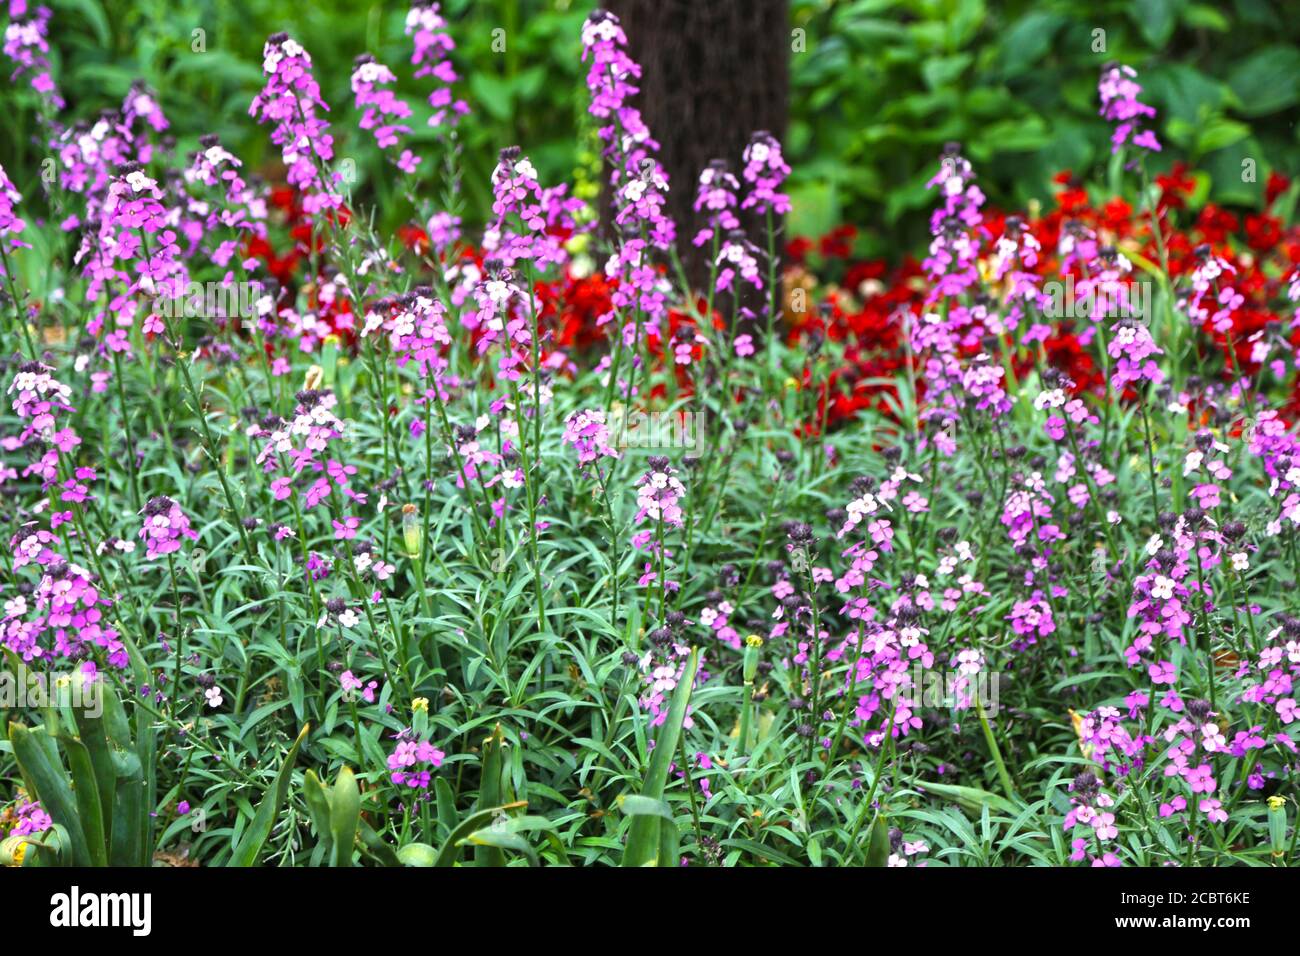 Flowerbed with Erysimum linifolium Bowles Mauve Perennial Wallflower on a spring day Stock Photo